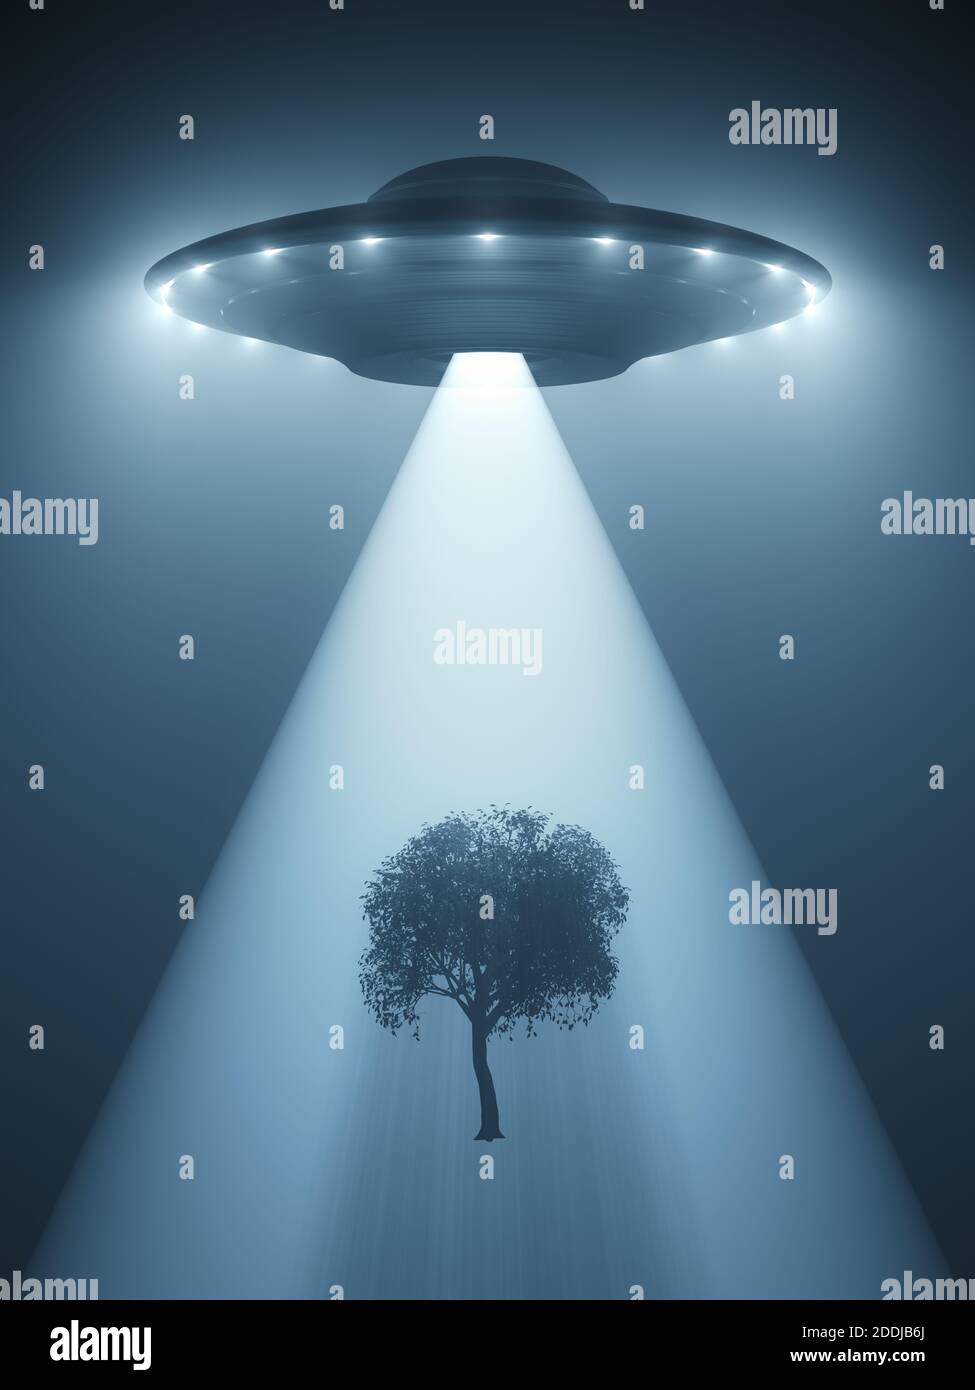 Unidentified flying object flying at night and levitating a tree with the tractor beam. 3D illustration. Stock Photo